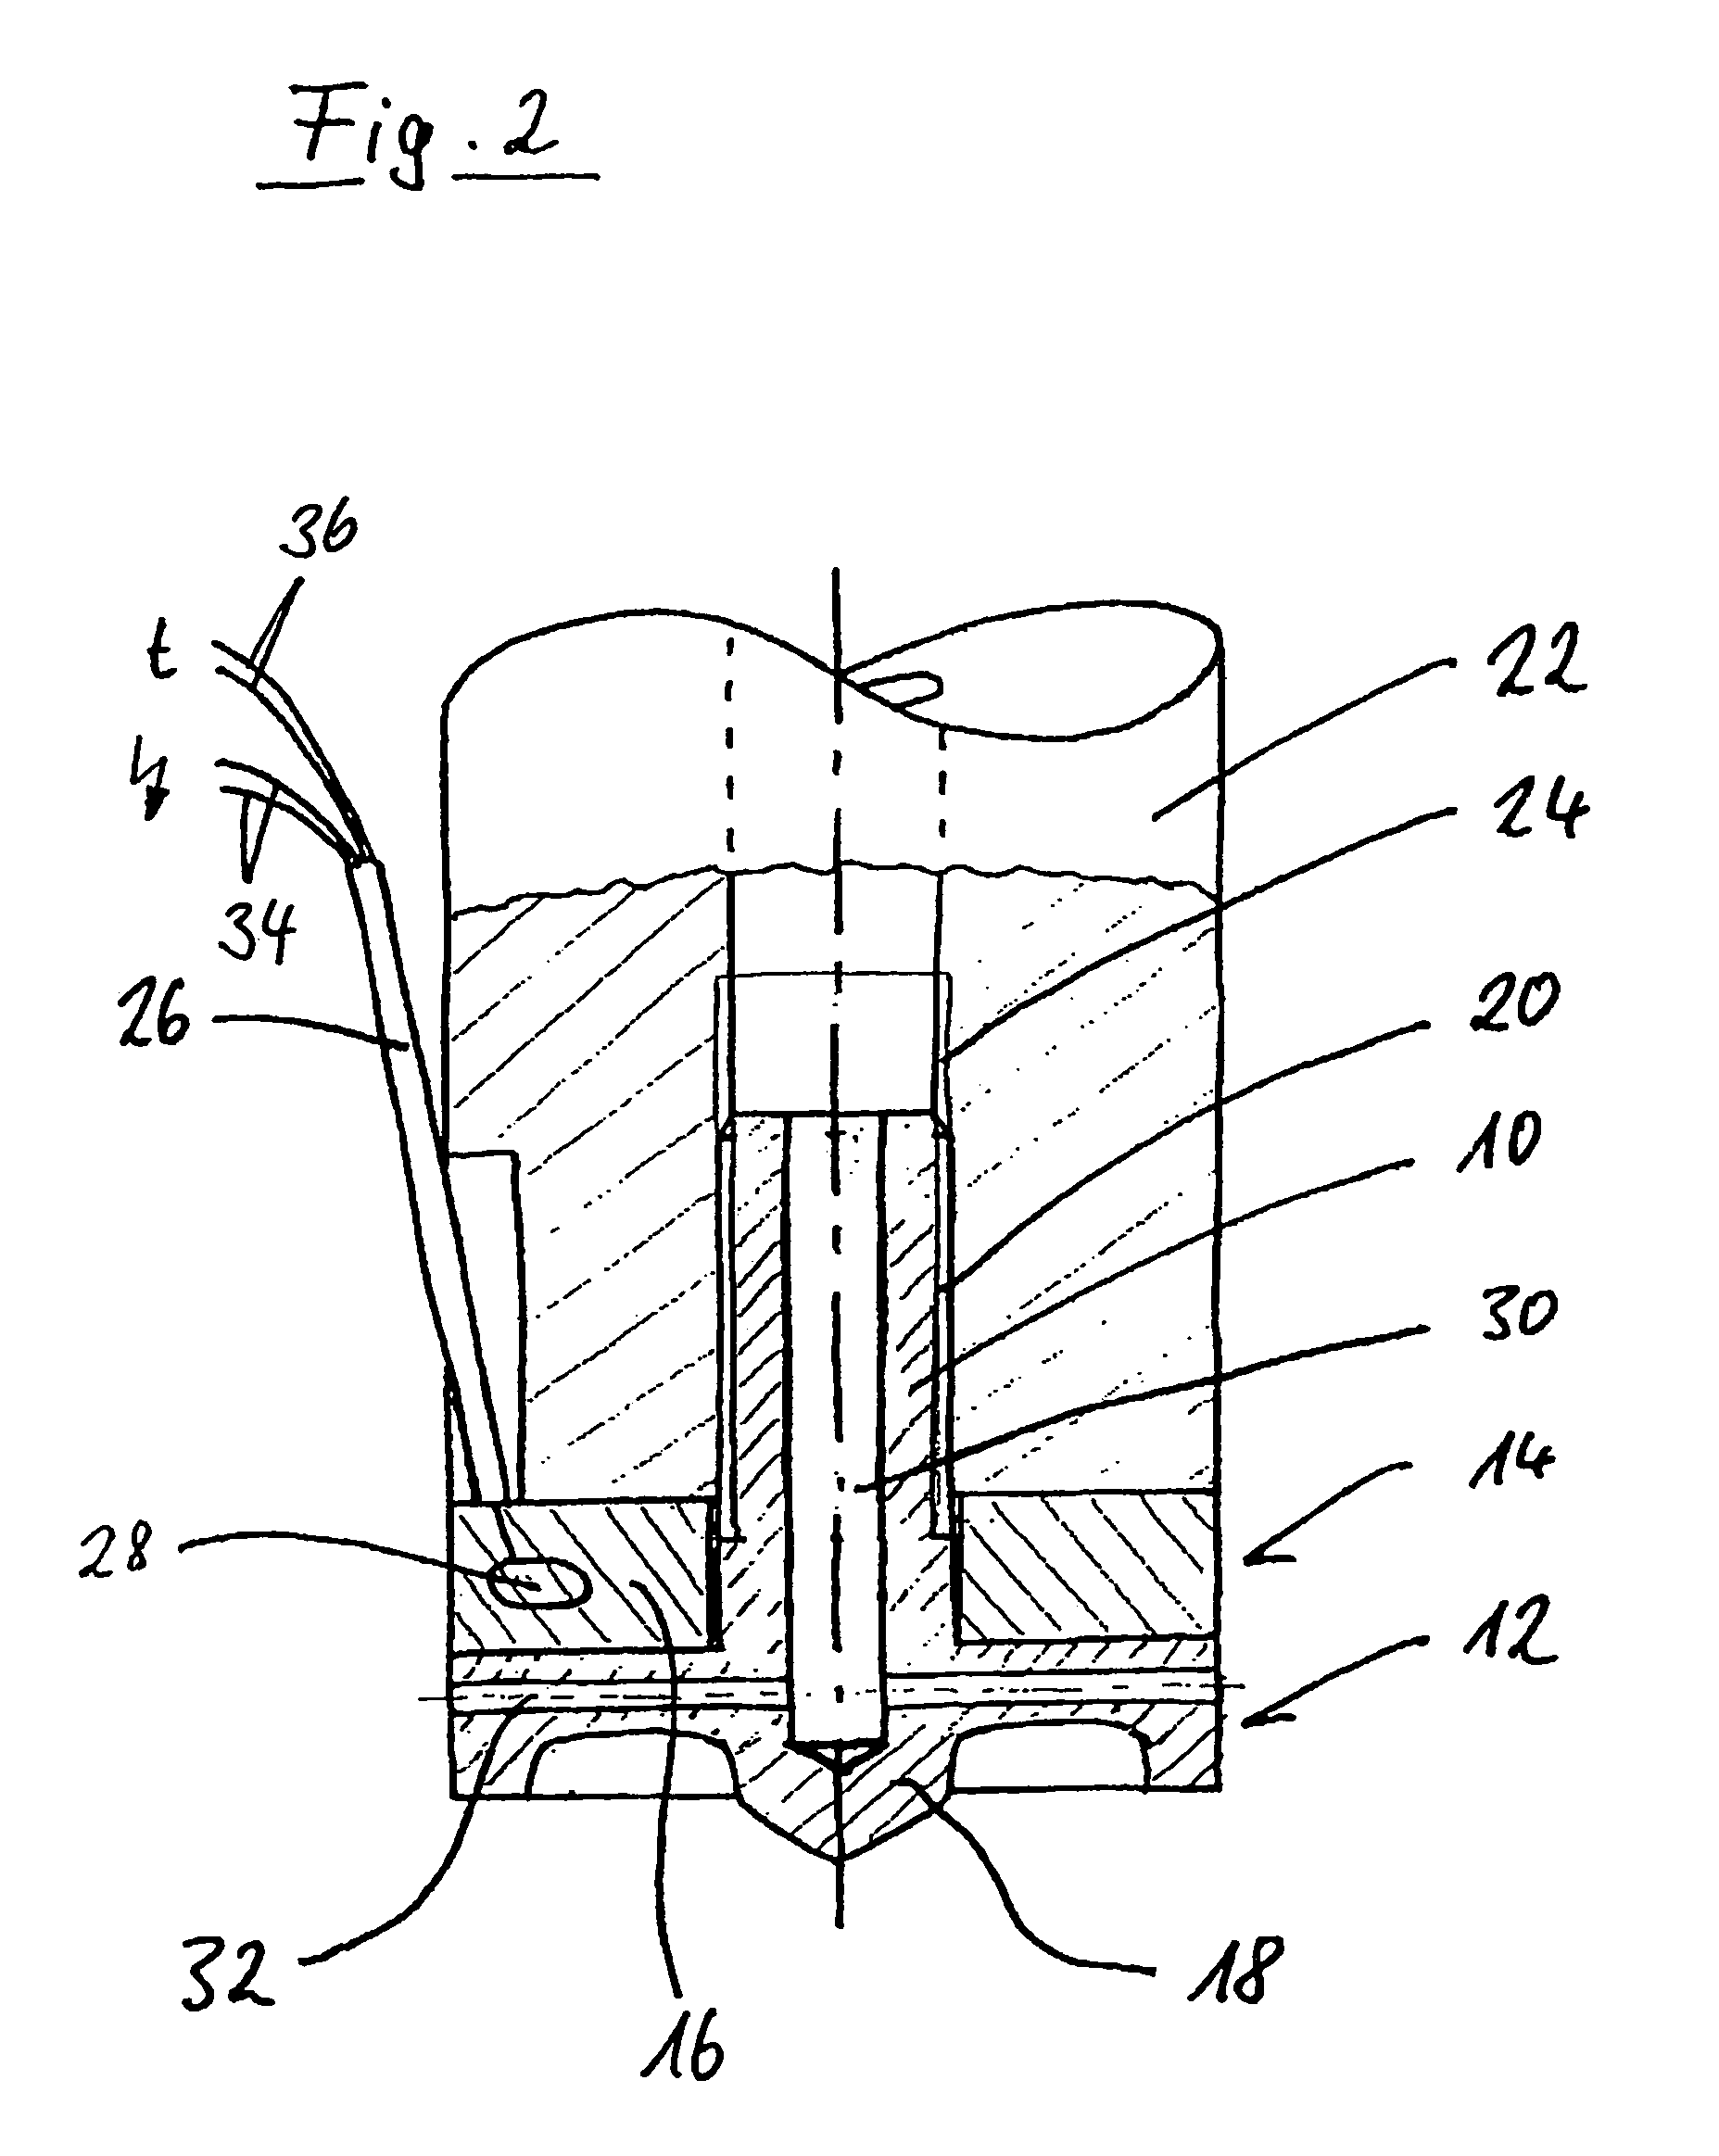 Apparatus for the connection of articles via at least one connection element plasticizable by heat